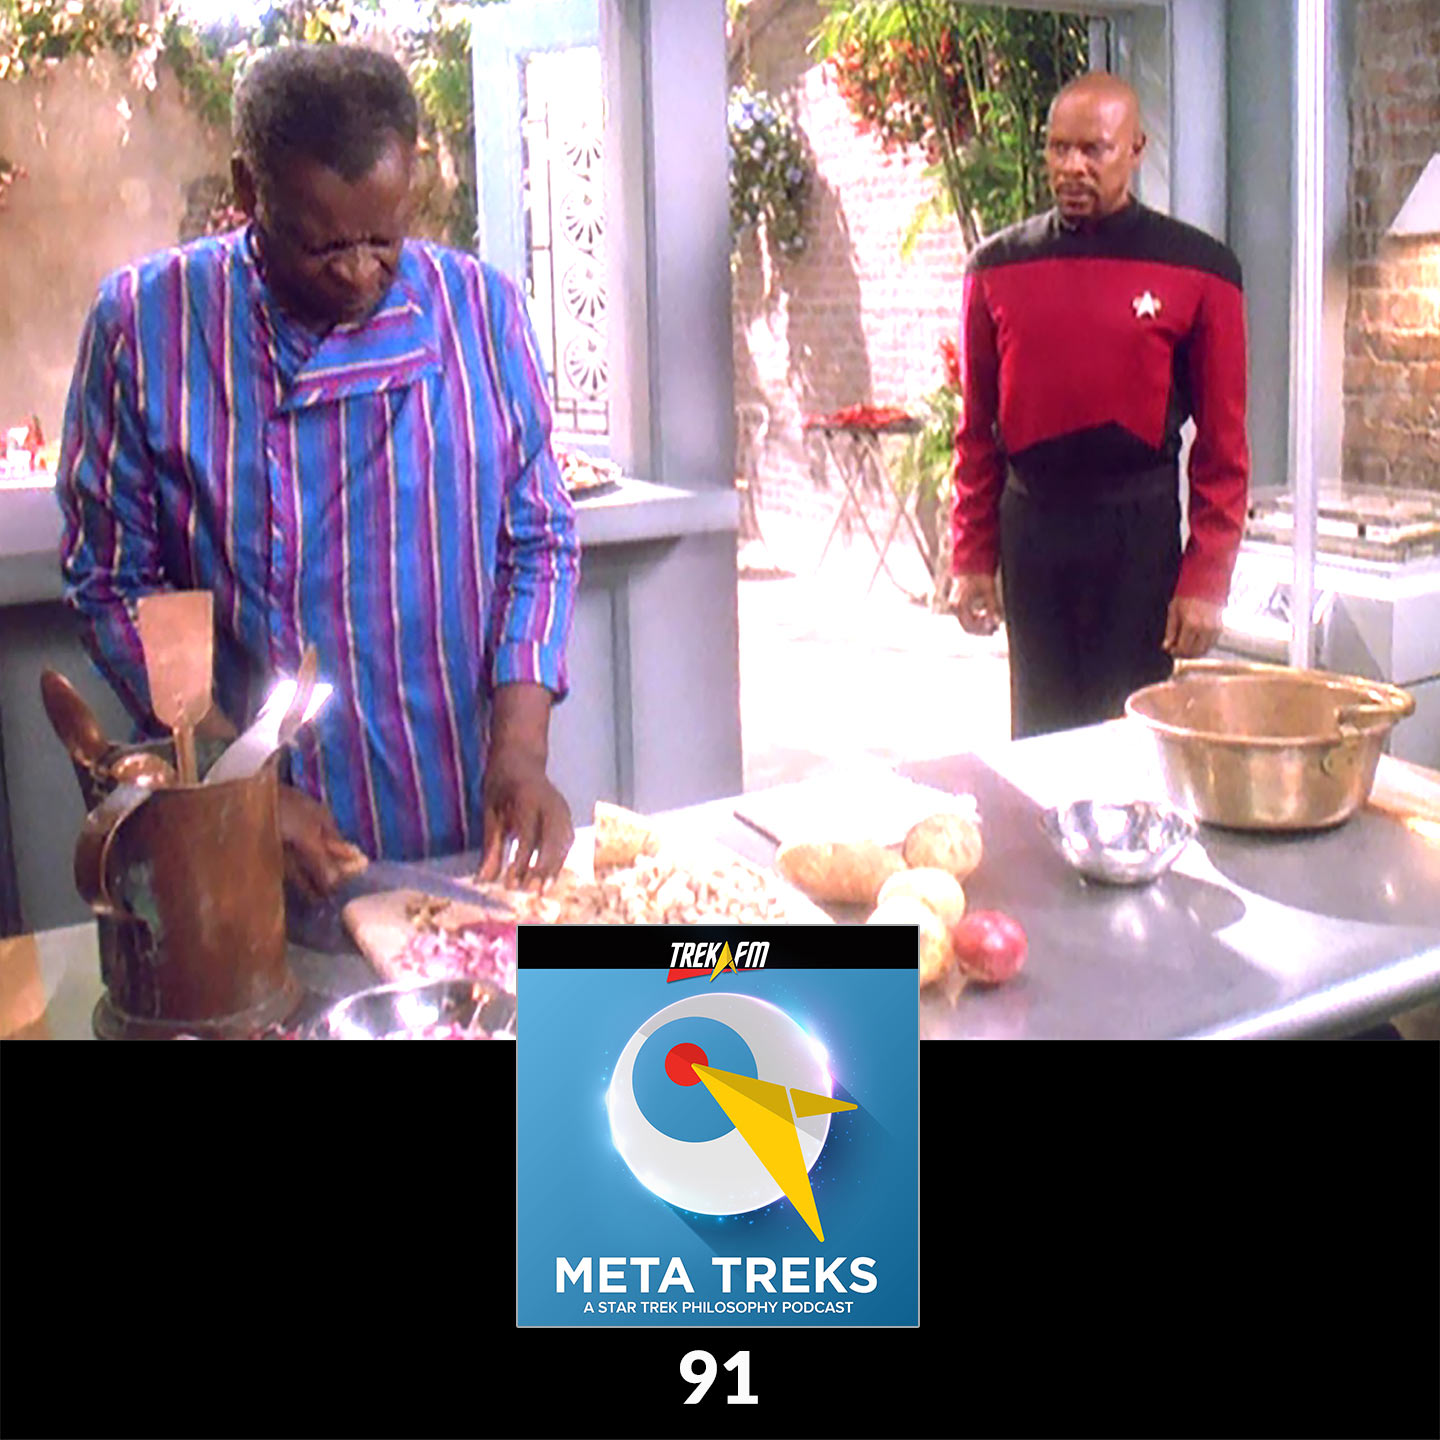 Meta Treks 91: Get That Whale Some Gumbo - Equality and Equal Rights.